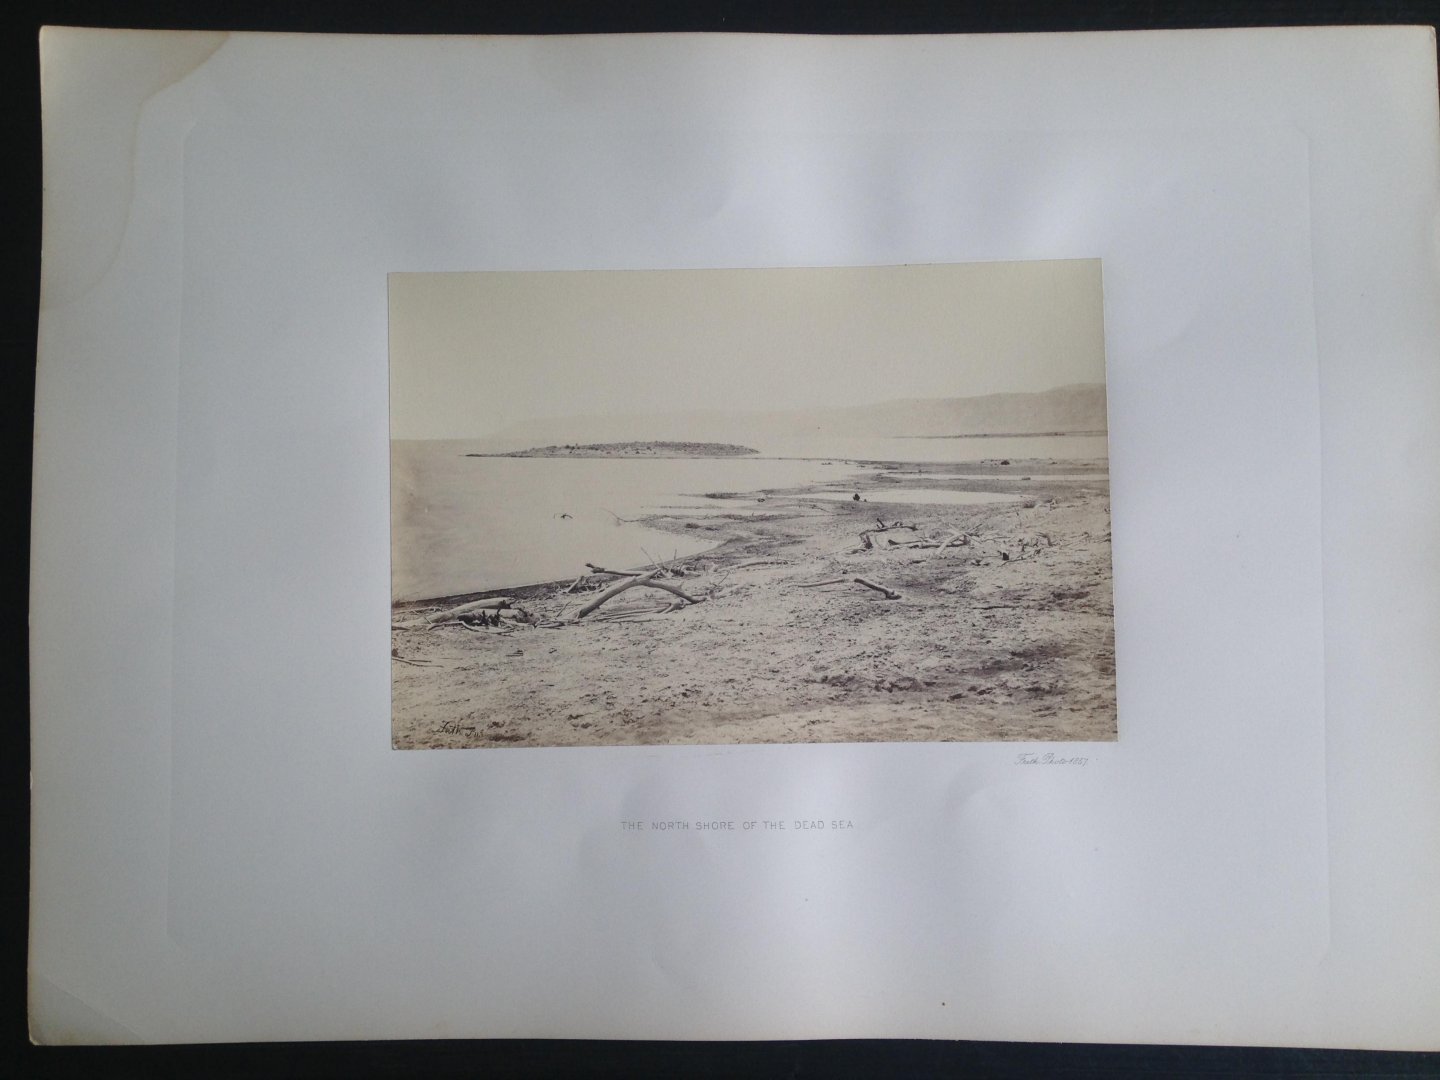 Frith, Francis - The North Shore of the Dead Sea, Series Egypt and Palestine